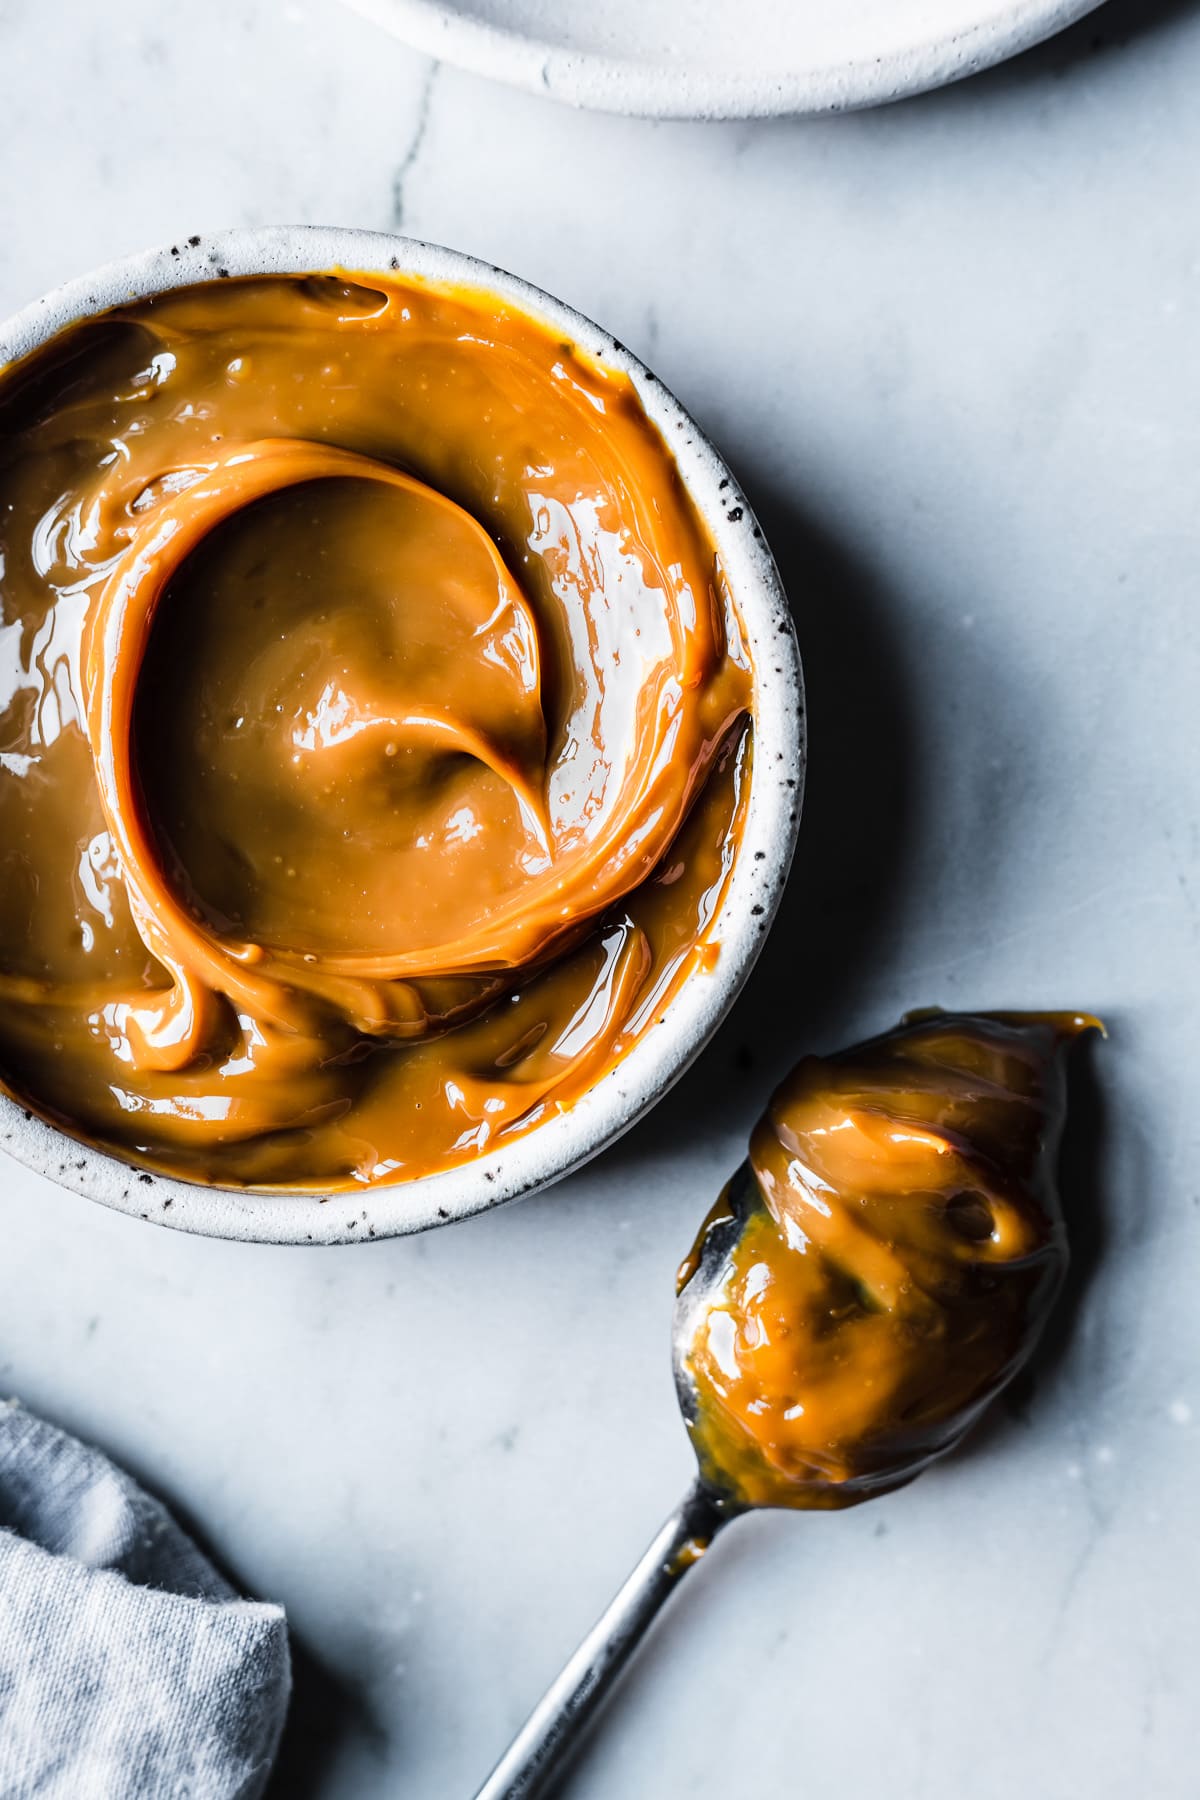 A white ceramic bowl filled with swirls of dulce de leche resting on a grey marble surface. A spoon covered in dulce de leche rests nearby. A pale blue linen napkin peeks into the bottom of the frame.